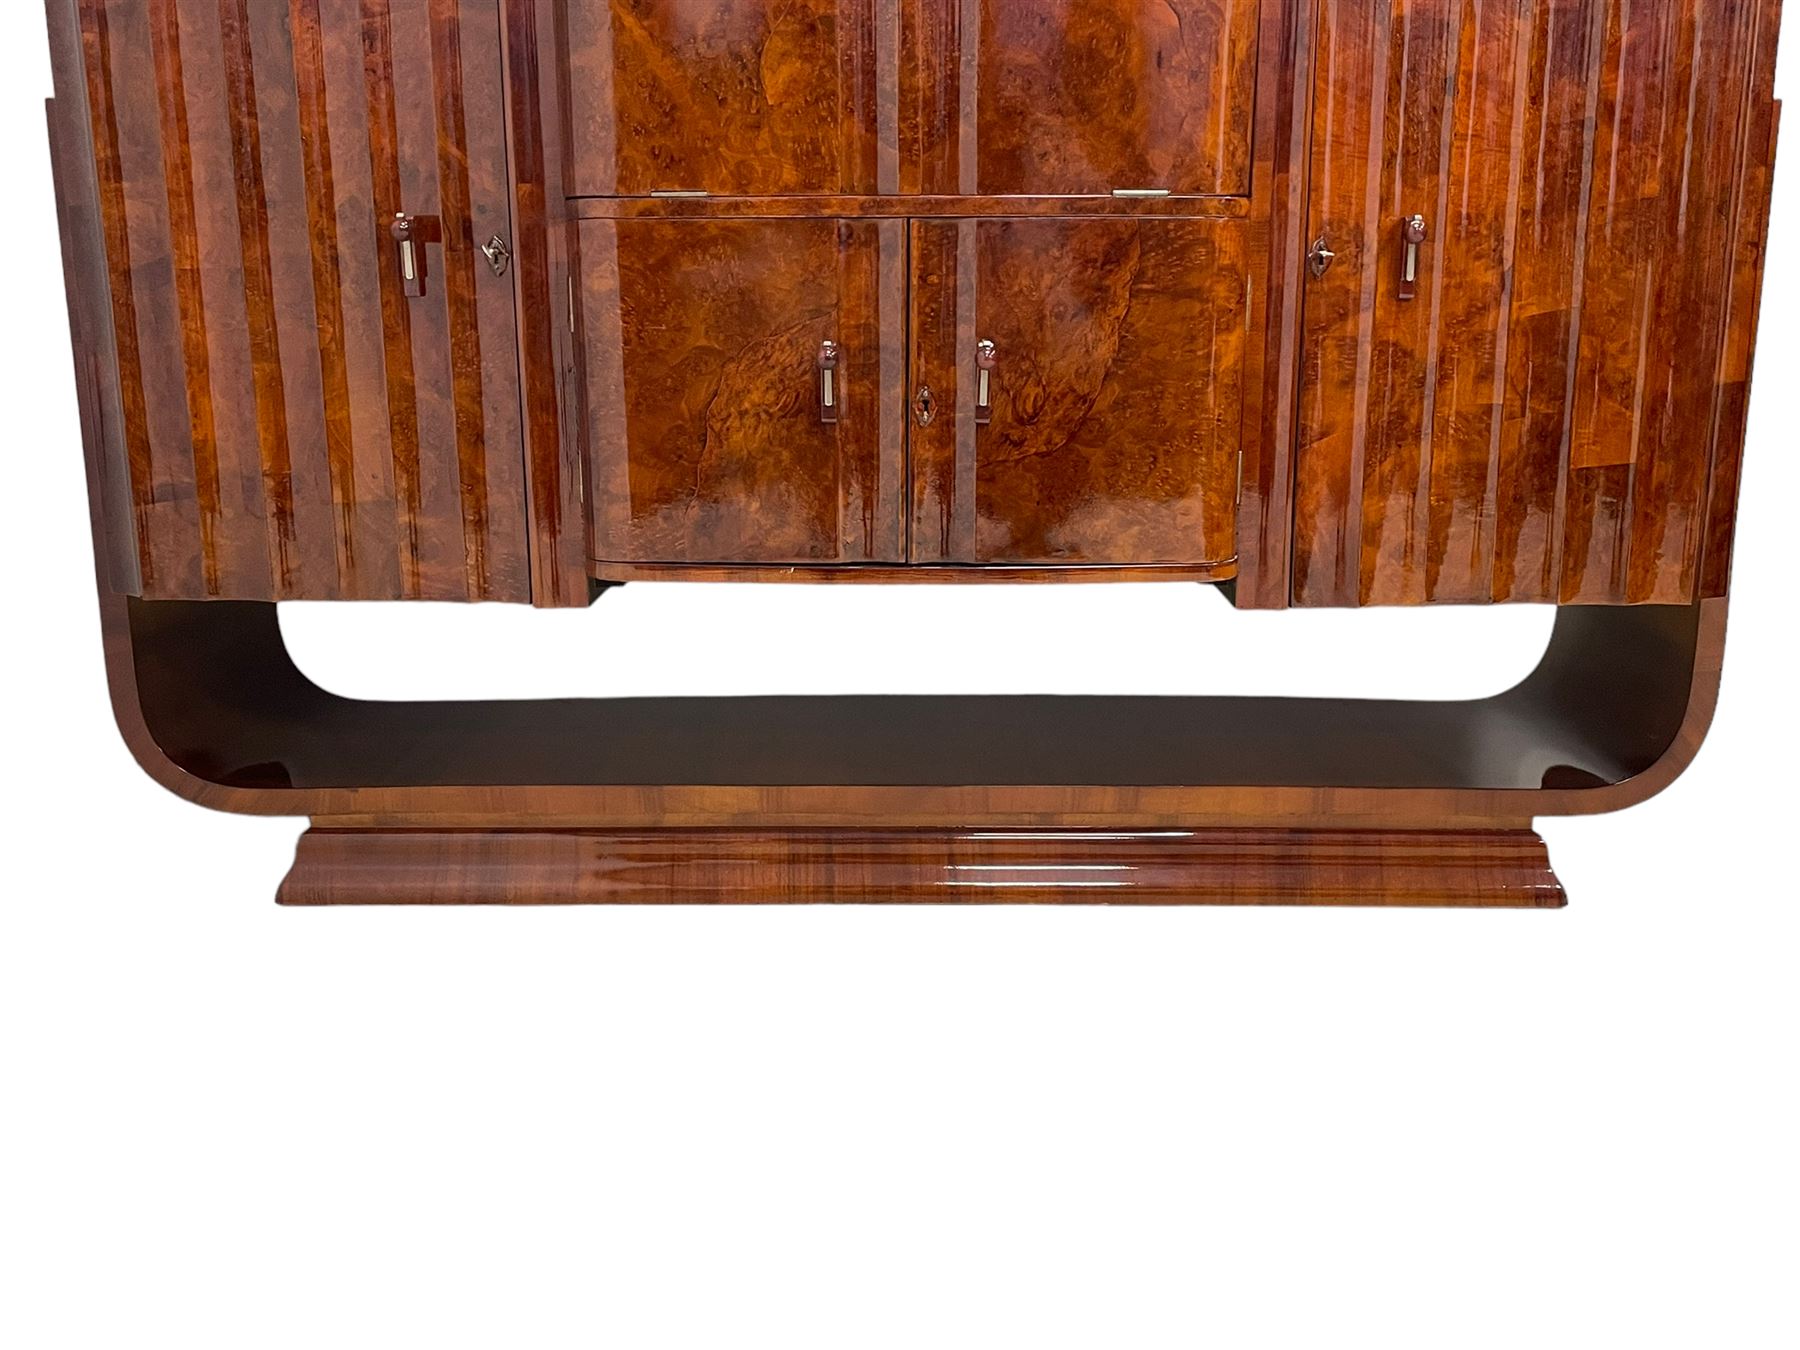 Attributed to Harry & Lou Epstein - Art Deco circa. 1930s figured walnut sideboard - Image 14 of 17